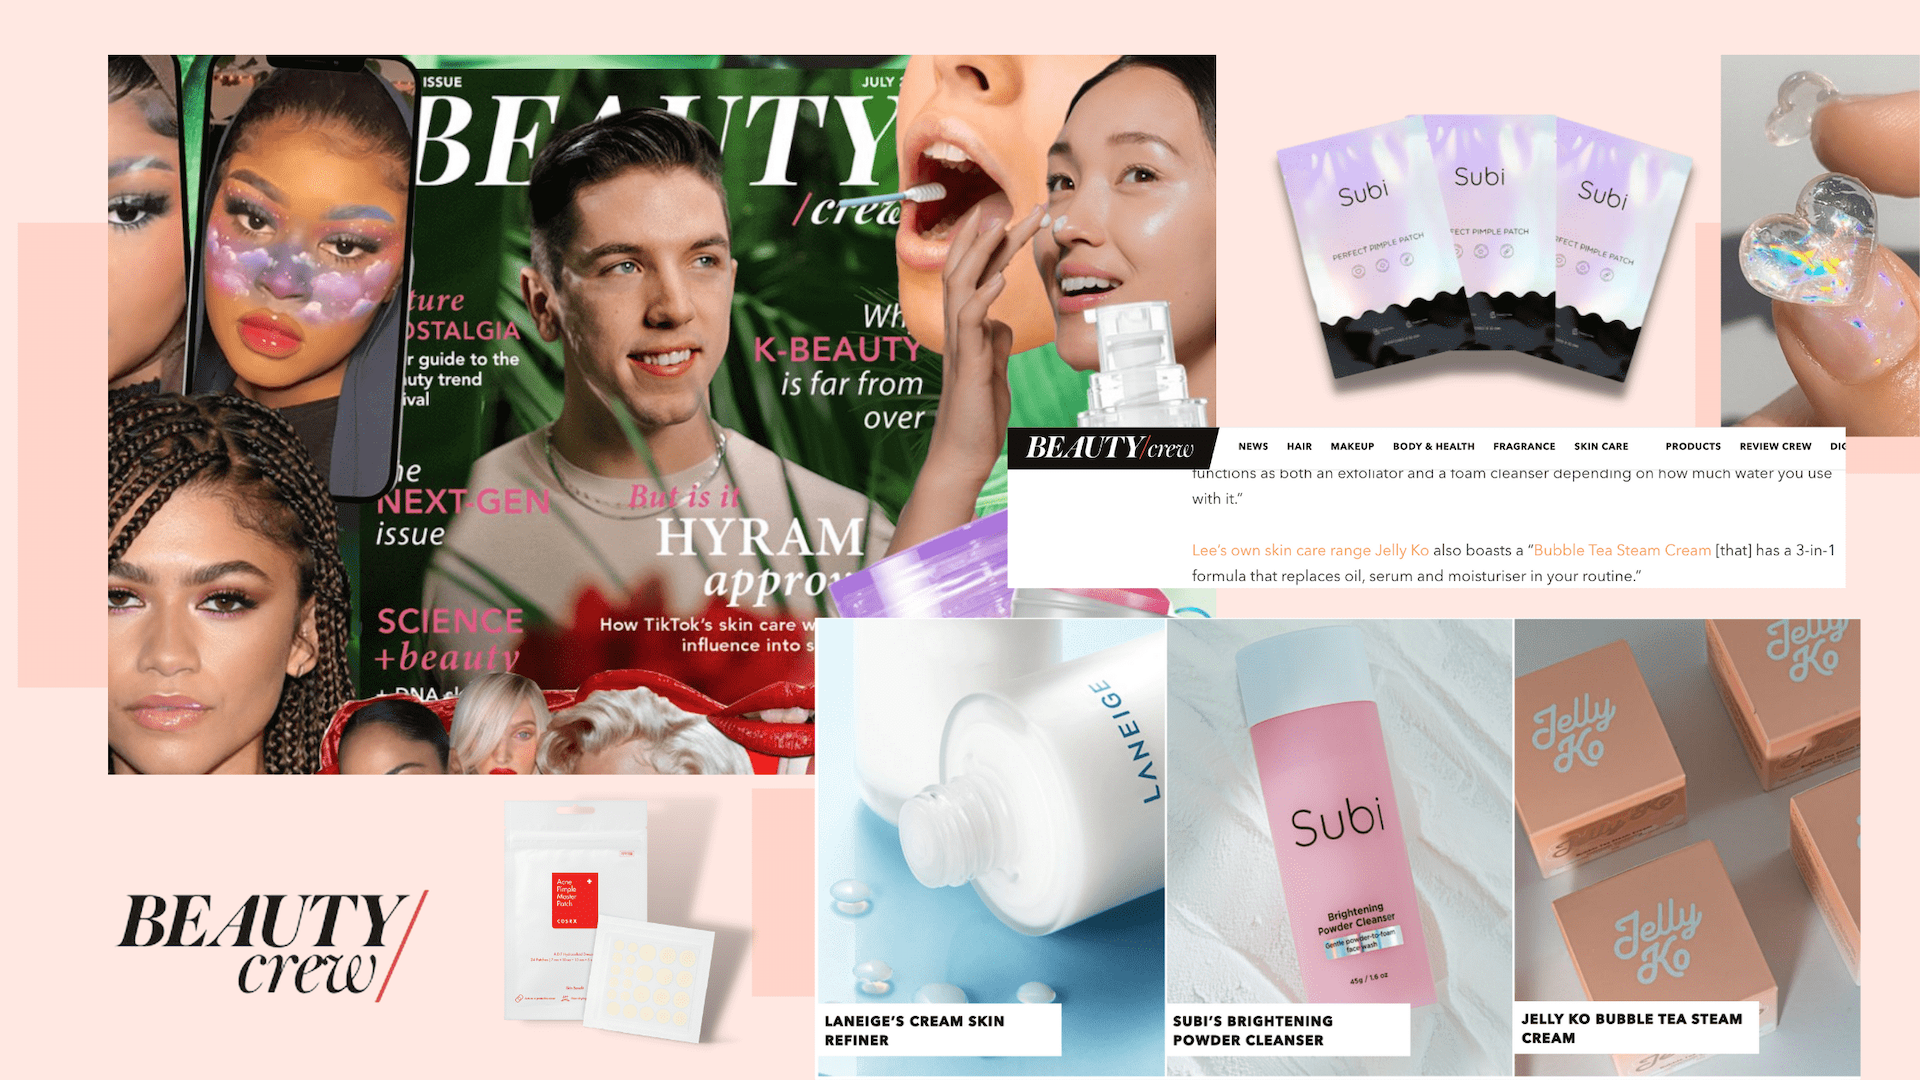 STYLE STORY featured in Beauty Crew